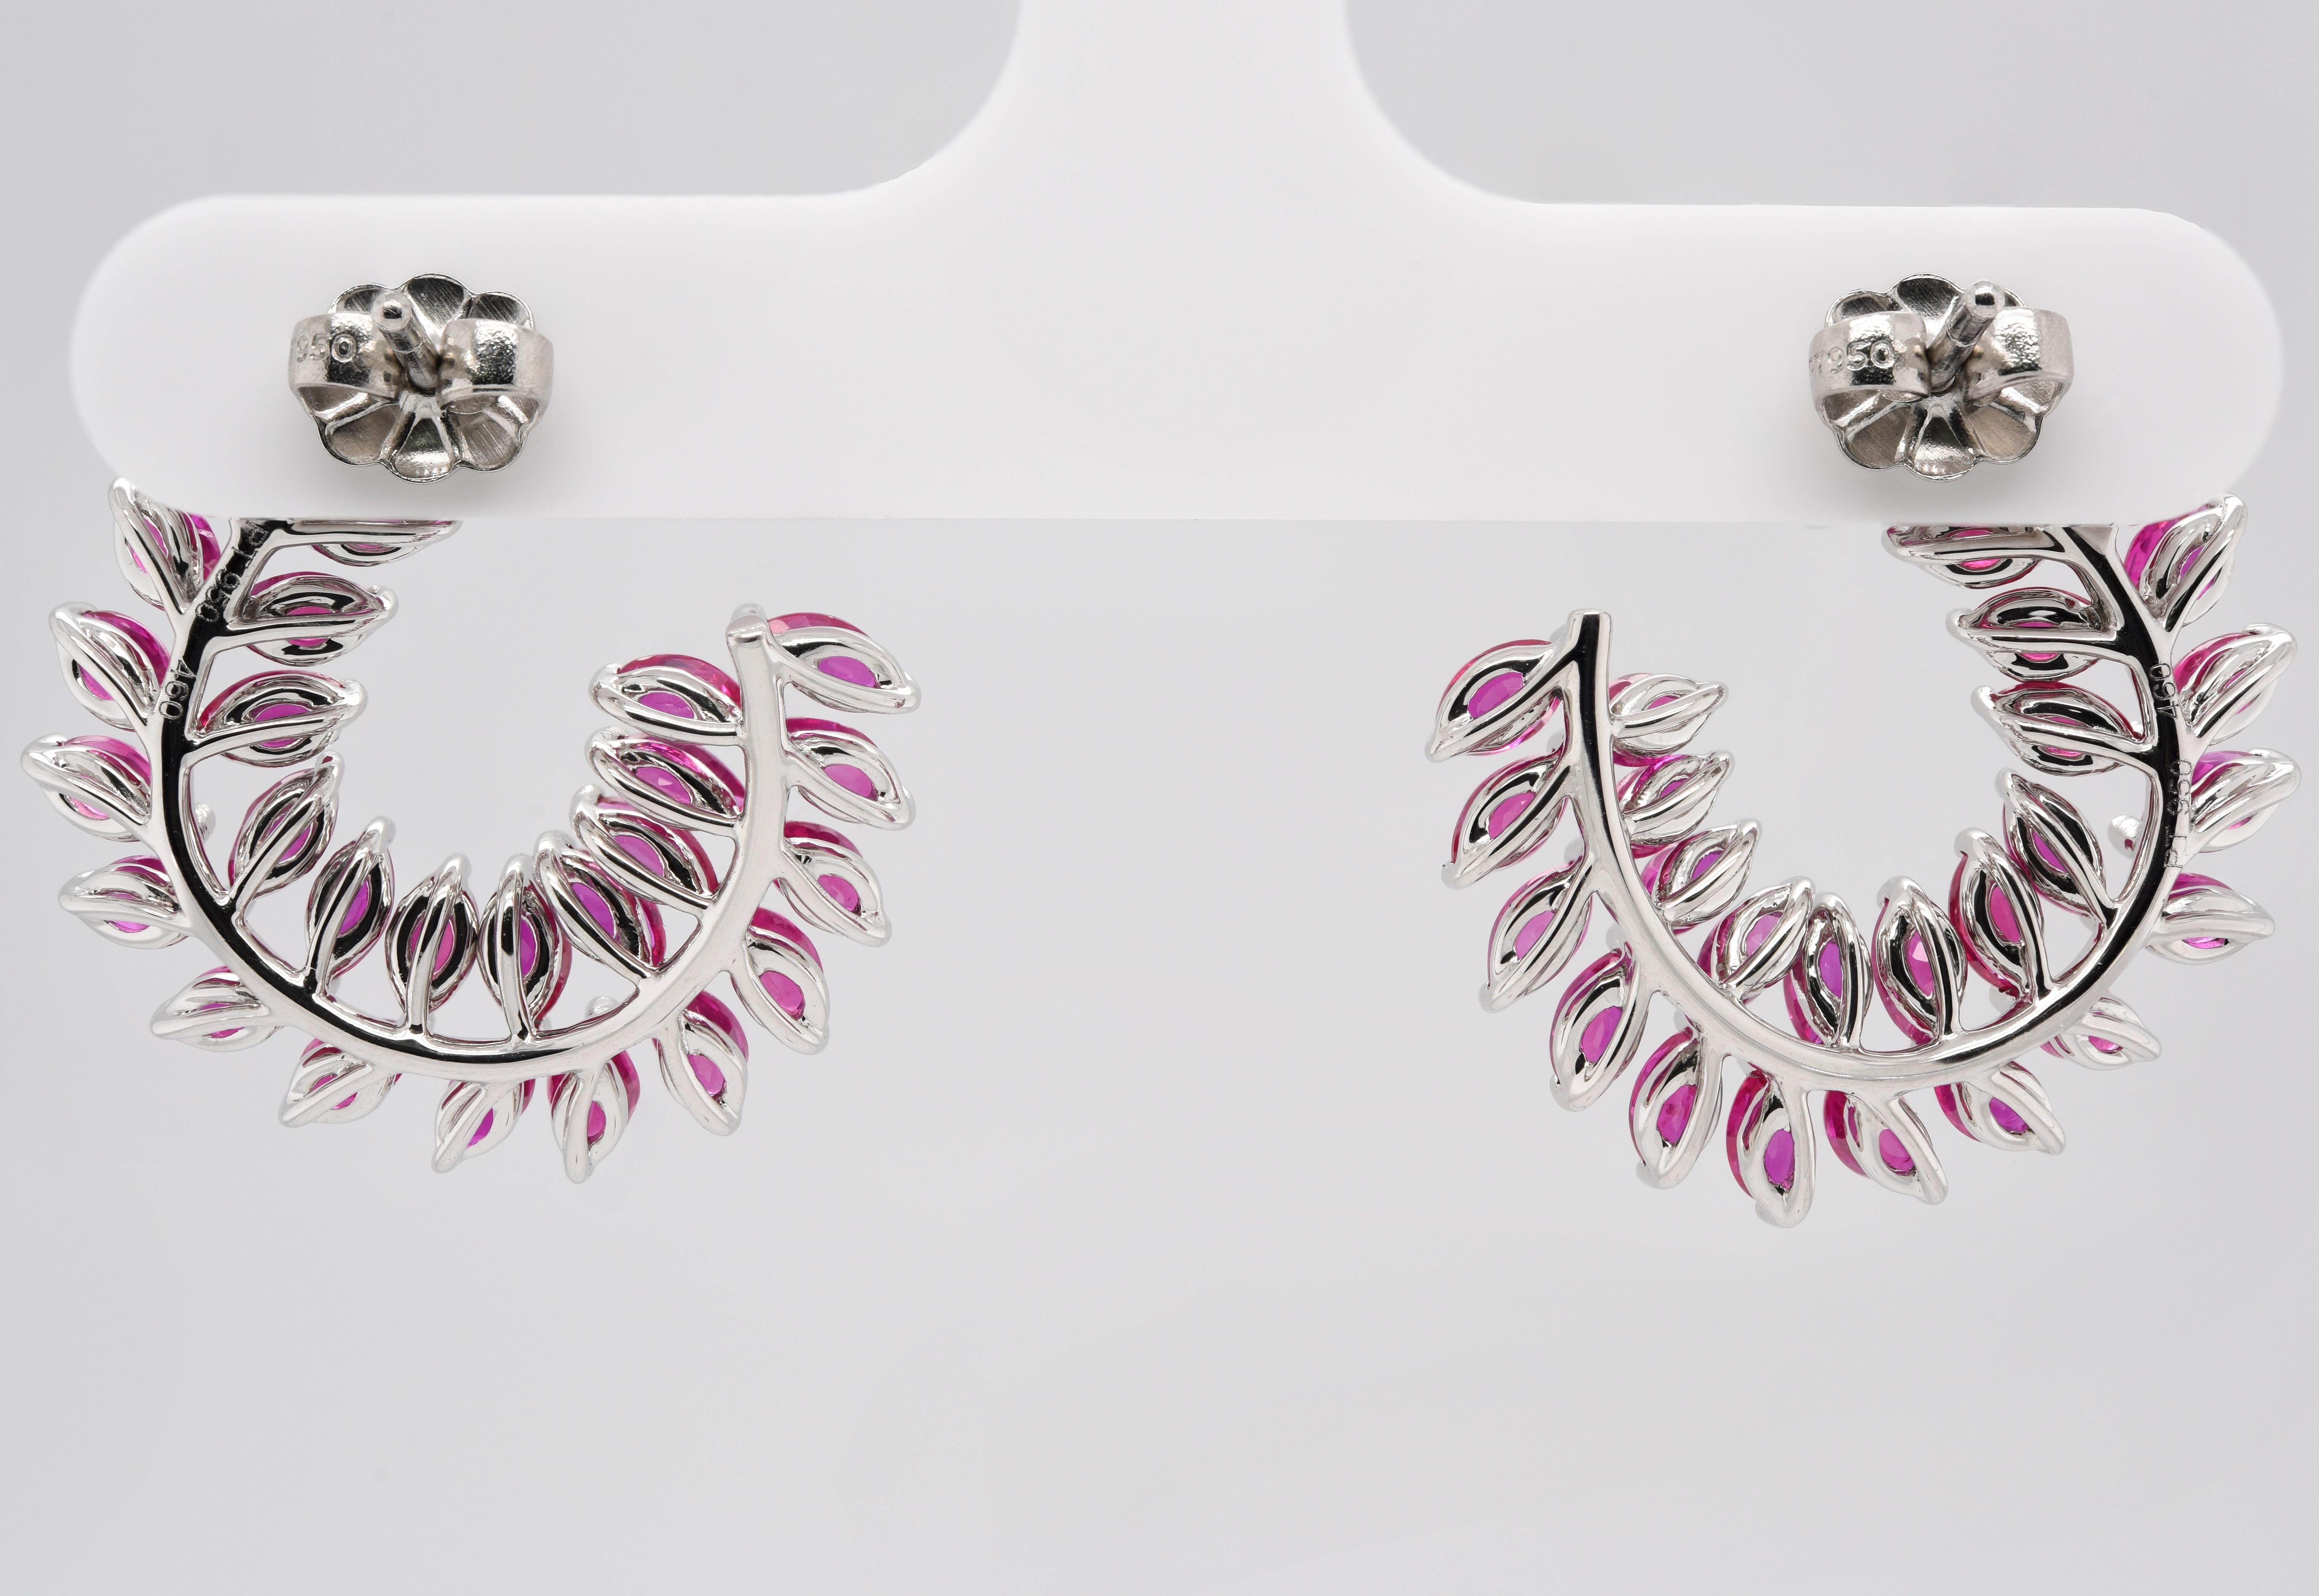  These are stunning circle leaf earrings made up of 6.75 carats of Rubies set in Platinum. 

At JAG New York we have been designing, manufacturing and guaranteeing our craftsmanship in New York since 1995!  Express yourself through jewelry! 
